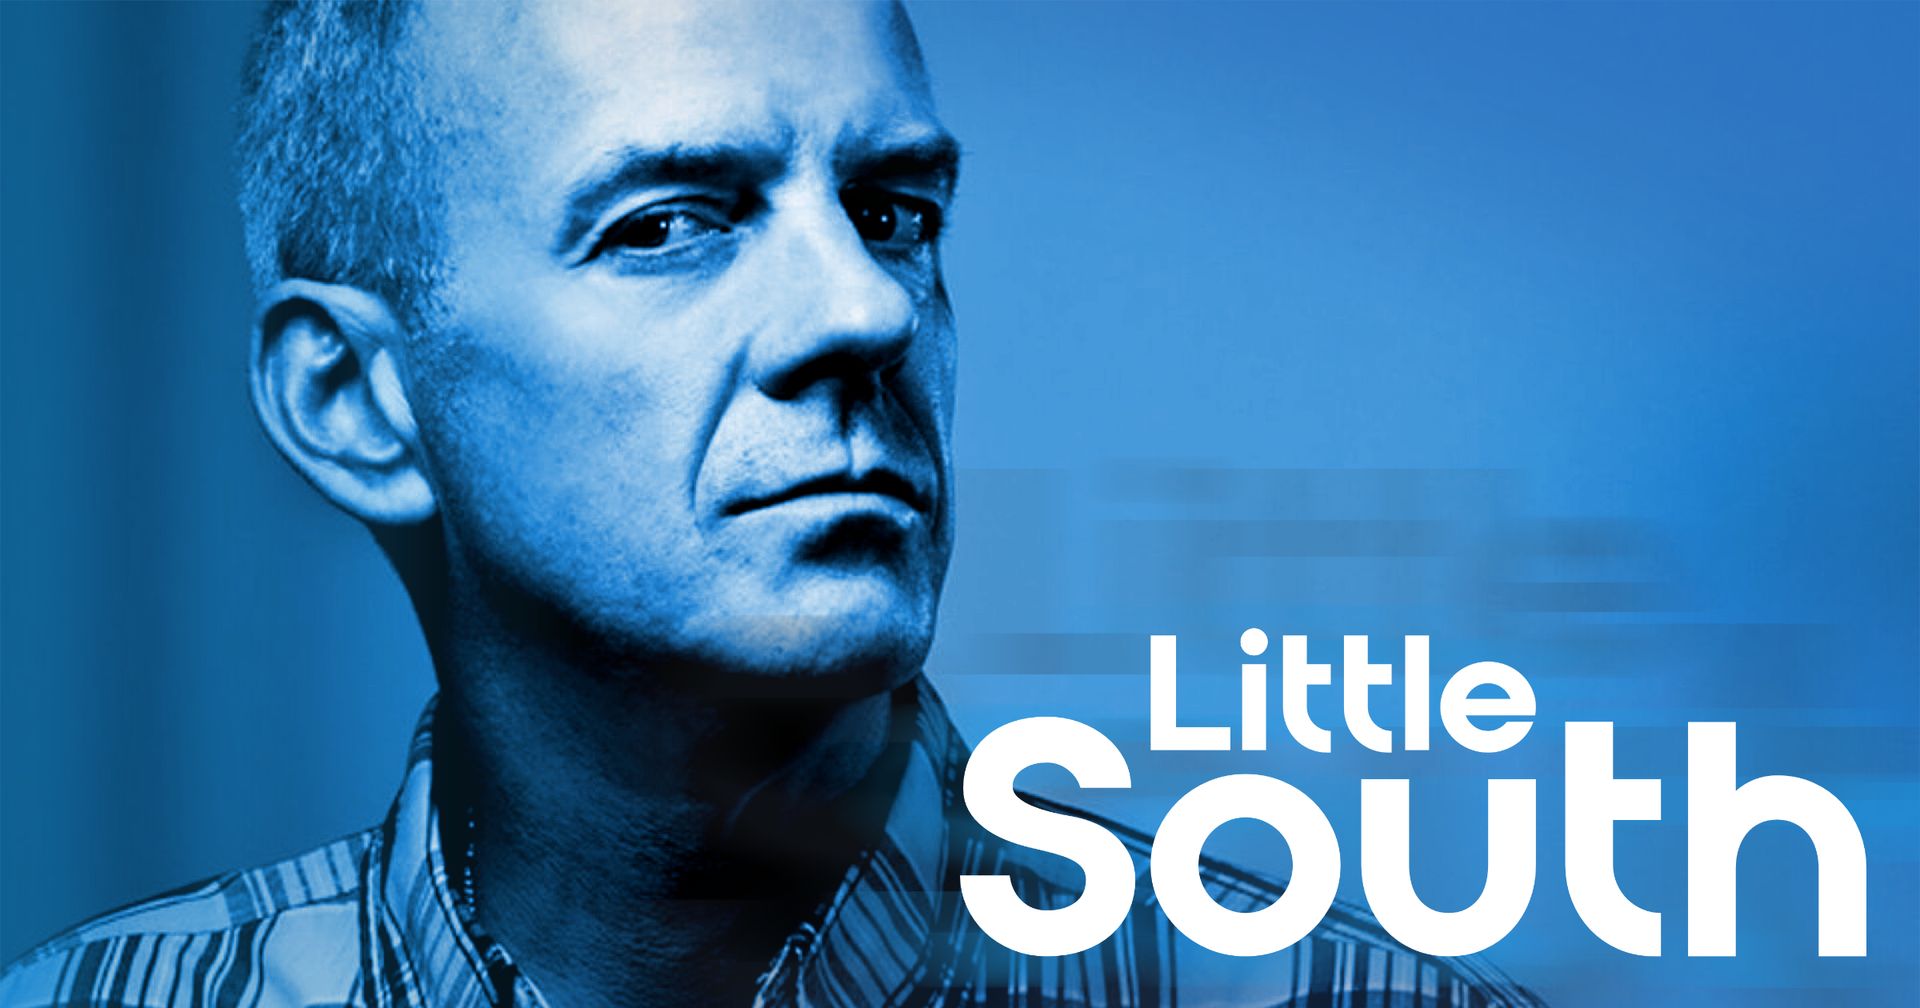 a poster for little south features fatboy slim in a shirt